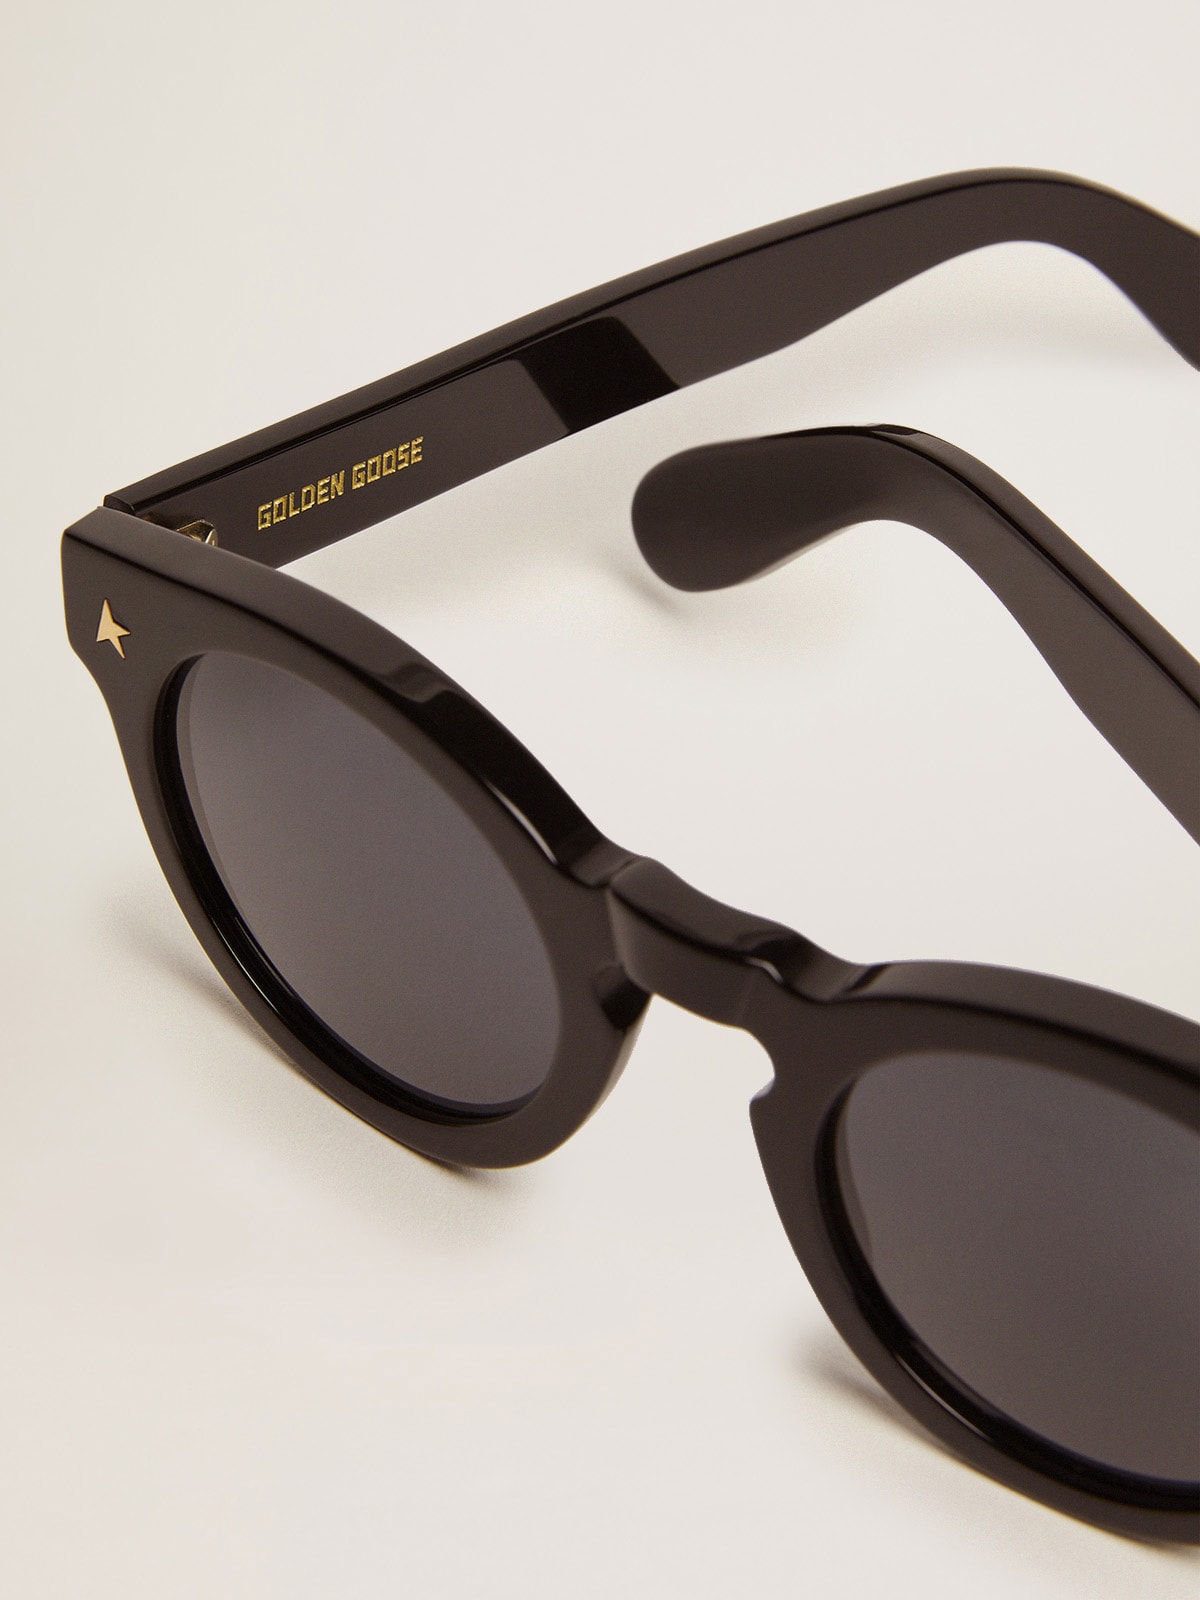 Golden Goose - Sunframe Cameron, Panthos style, with black frame and gold details in 